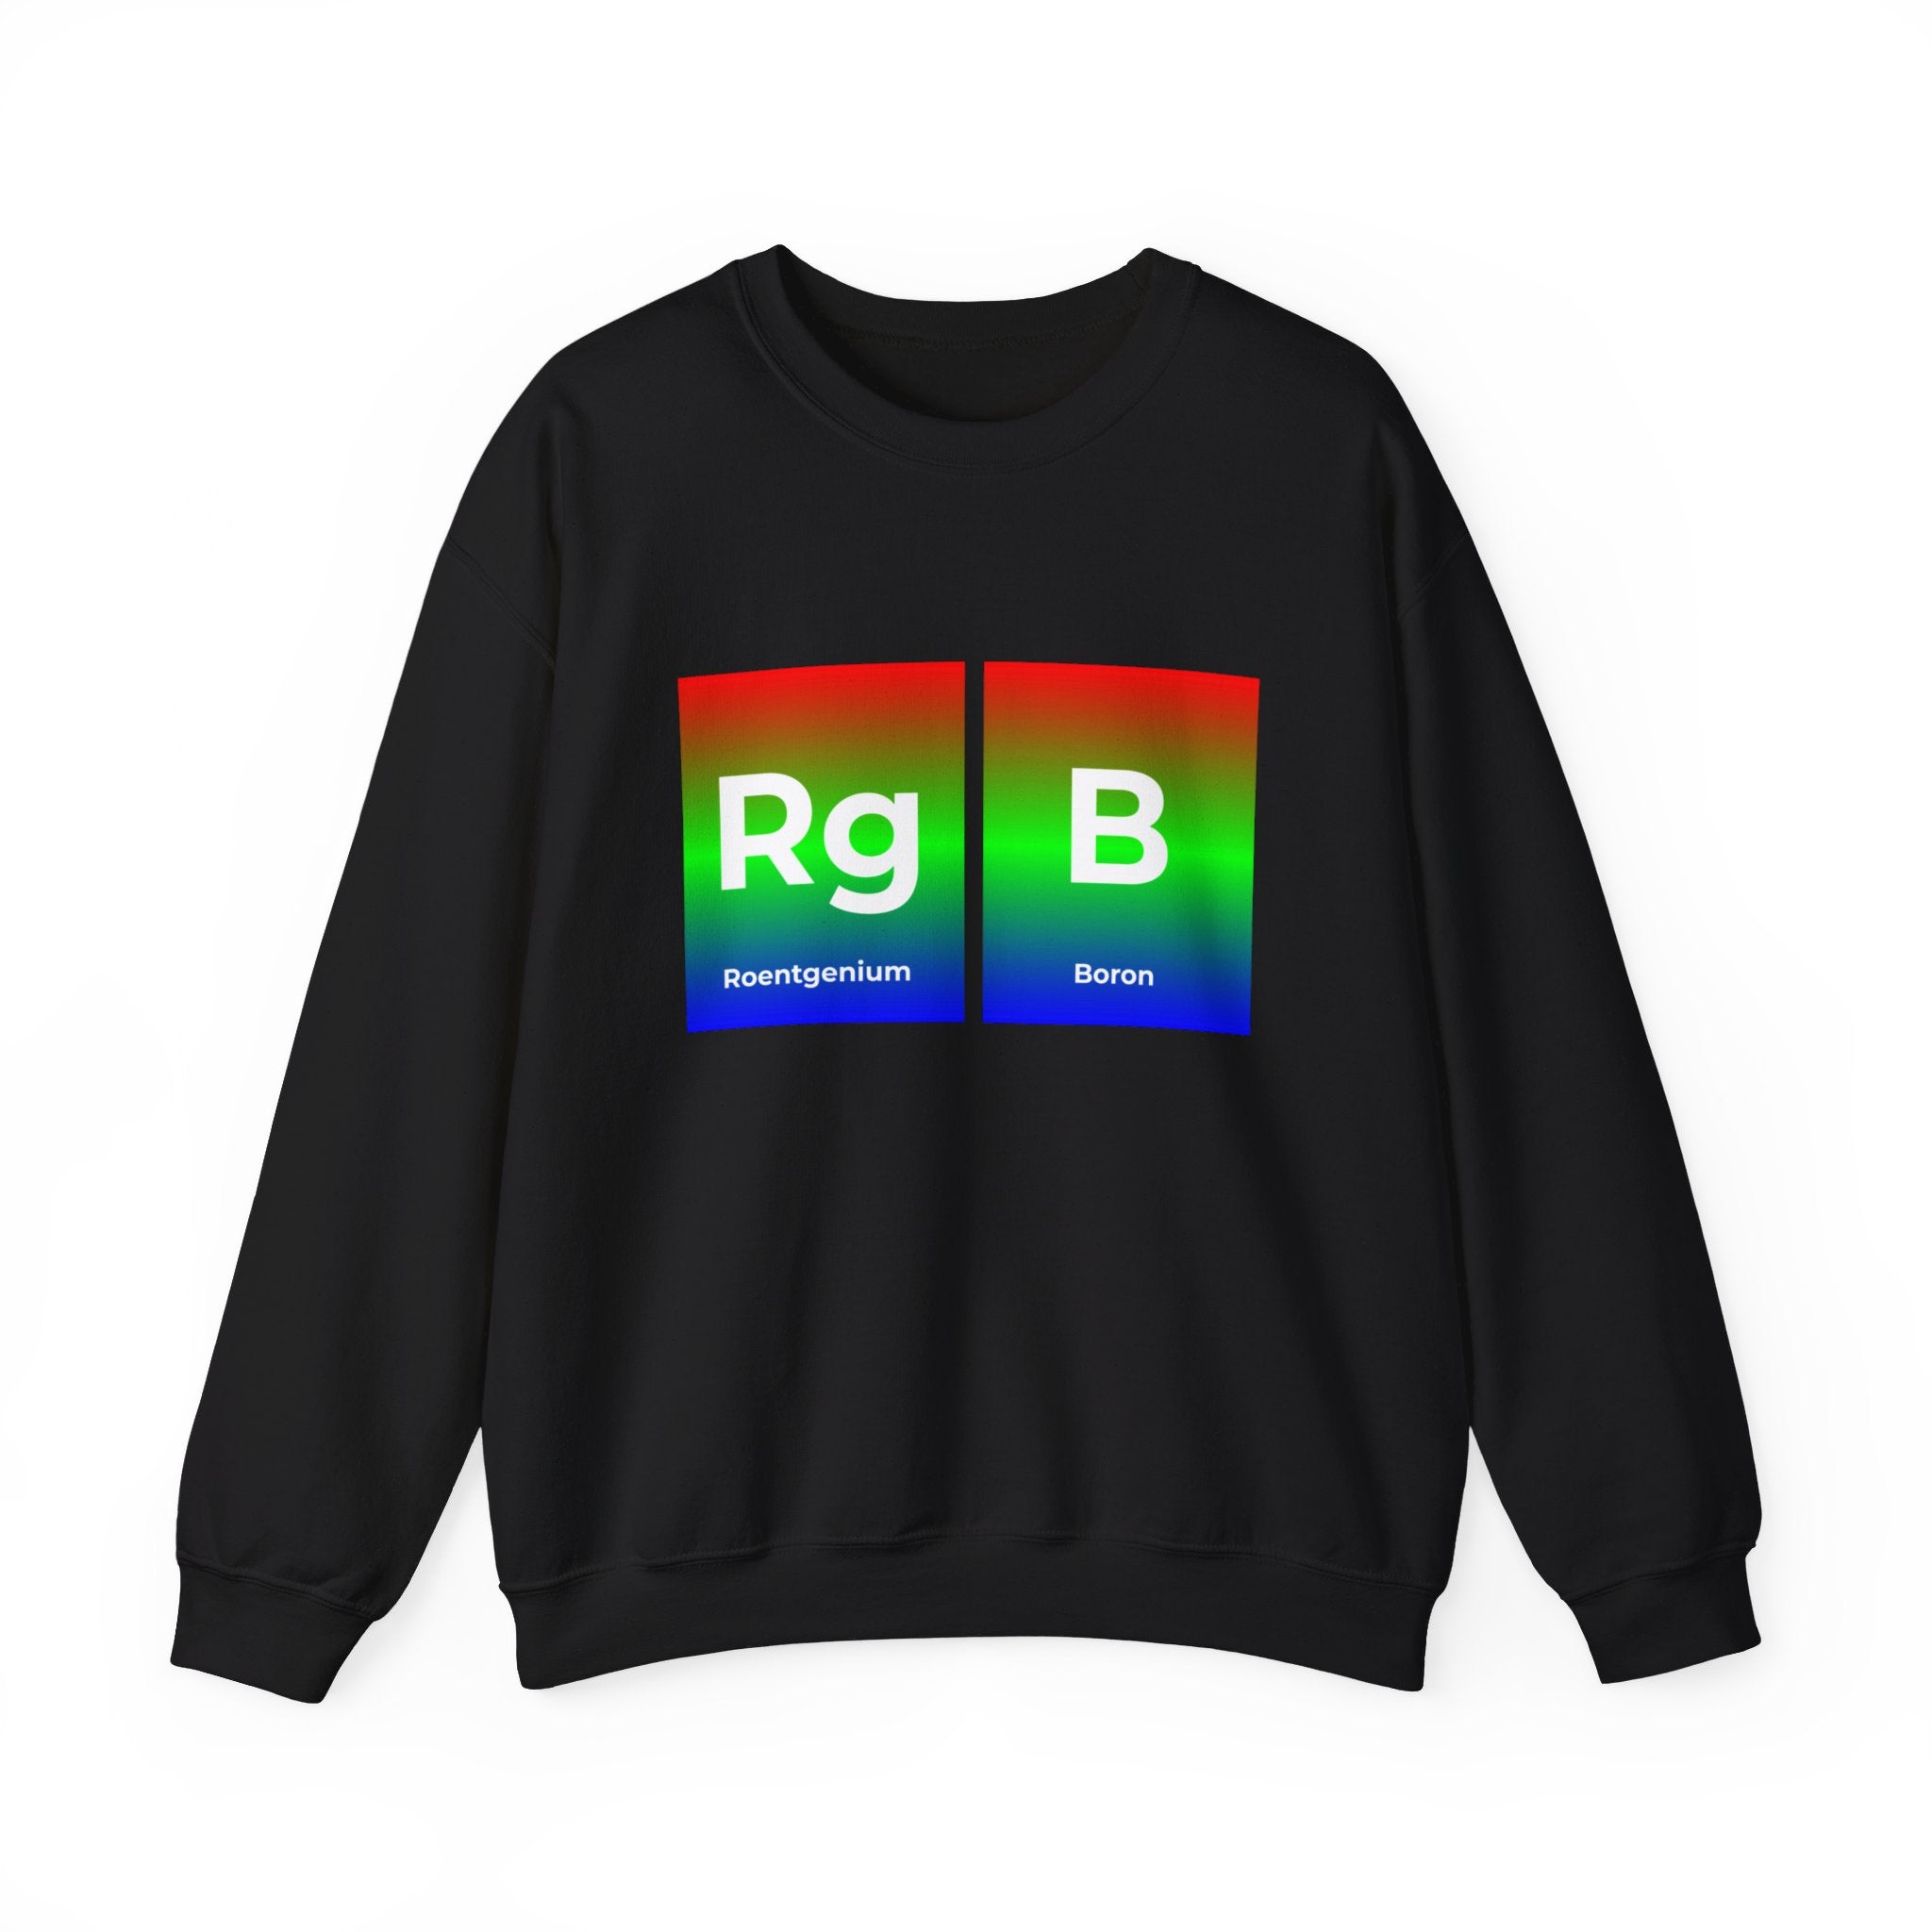 RG-B - Sweatshirt featuring periodic table elements "Rg" for Roentgenium and "B" for Boron in red, green, and blue gradient squares on the front, perfect for comfort lovers.